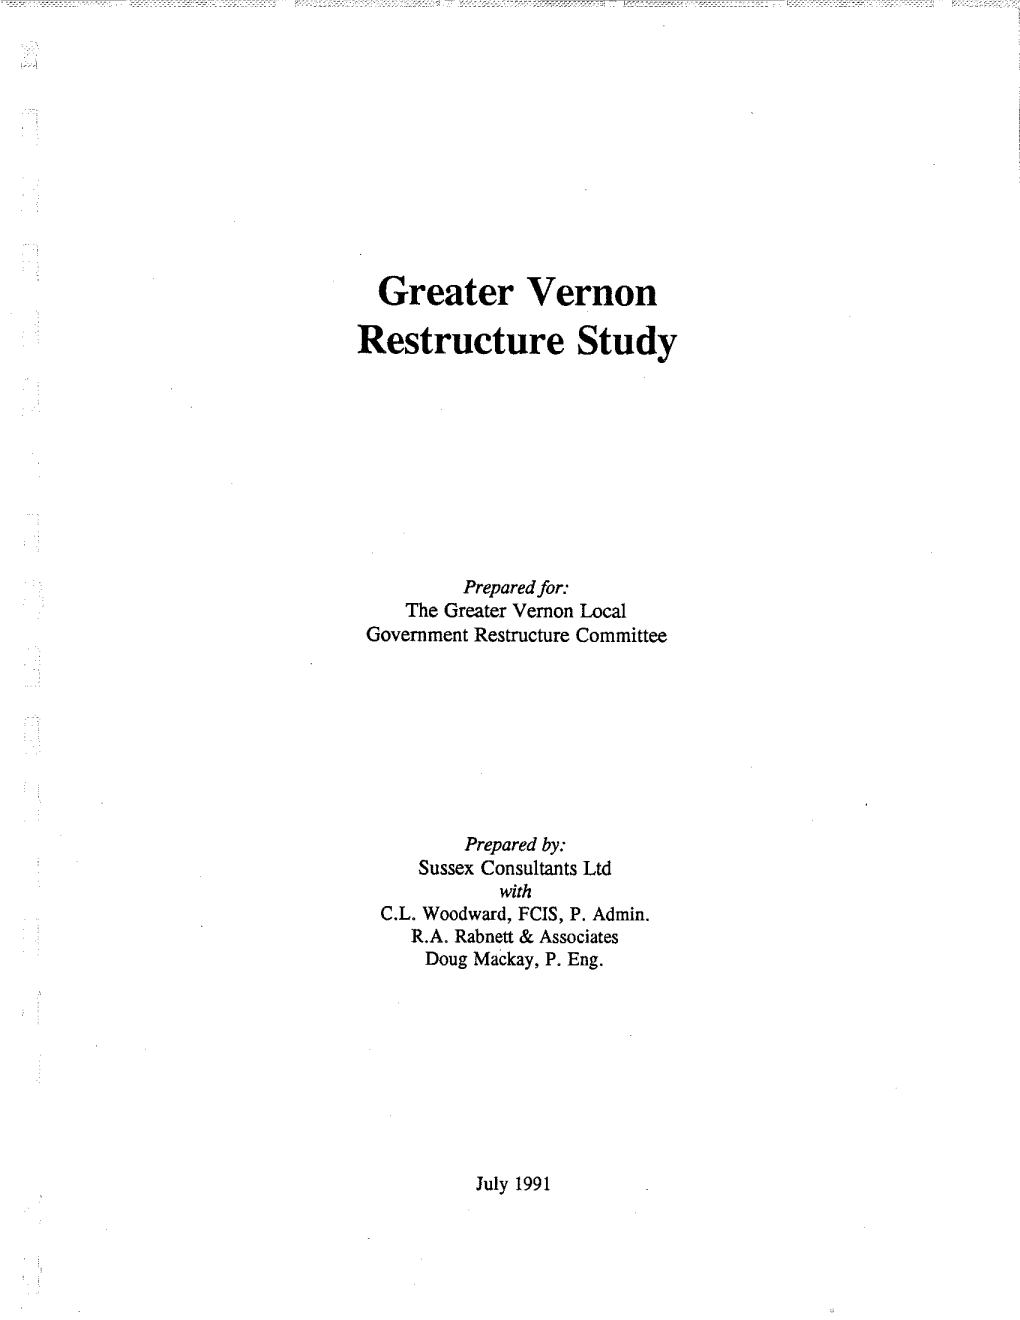 Greater Vernon Restructure Study